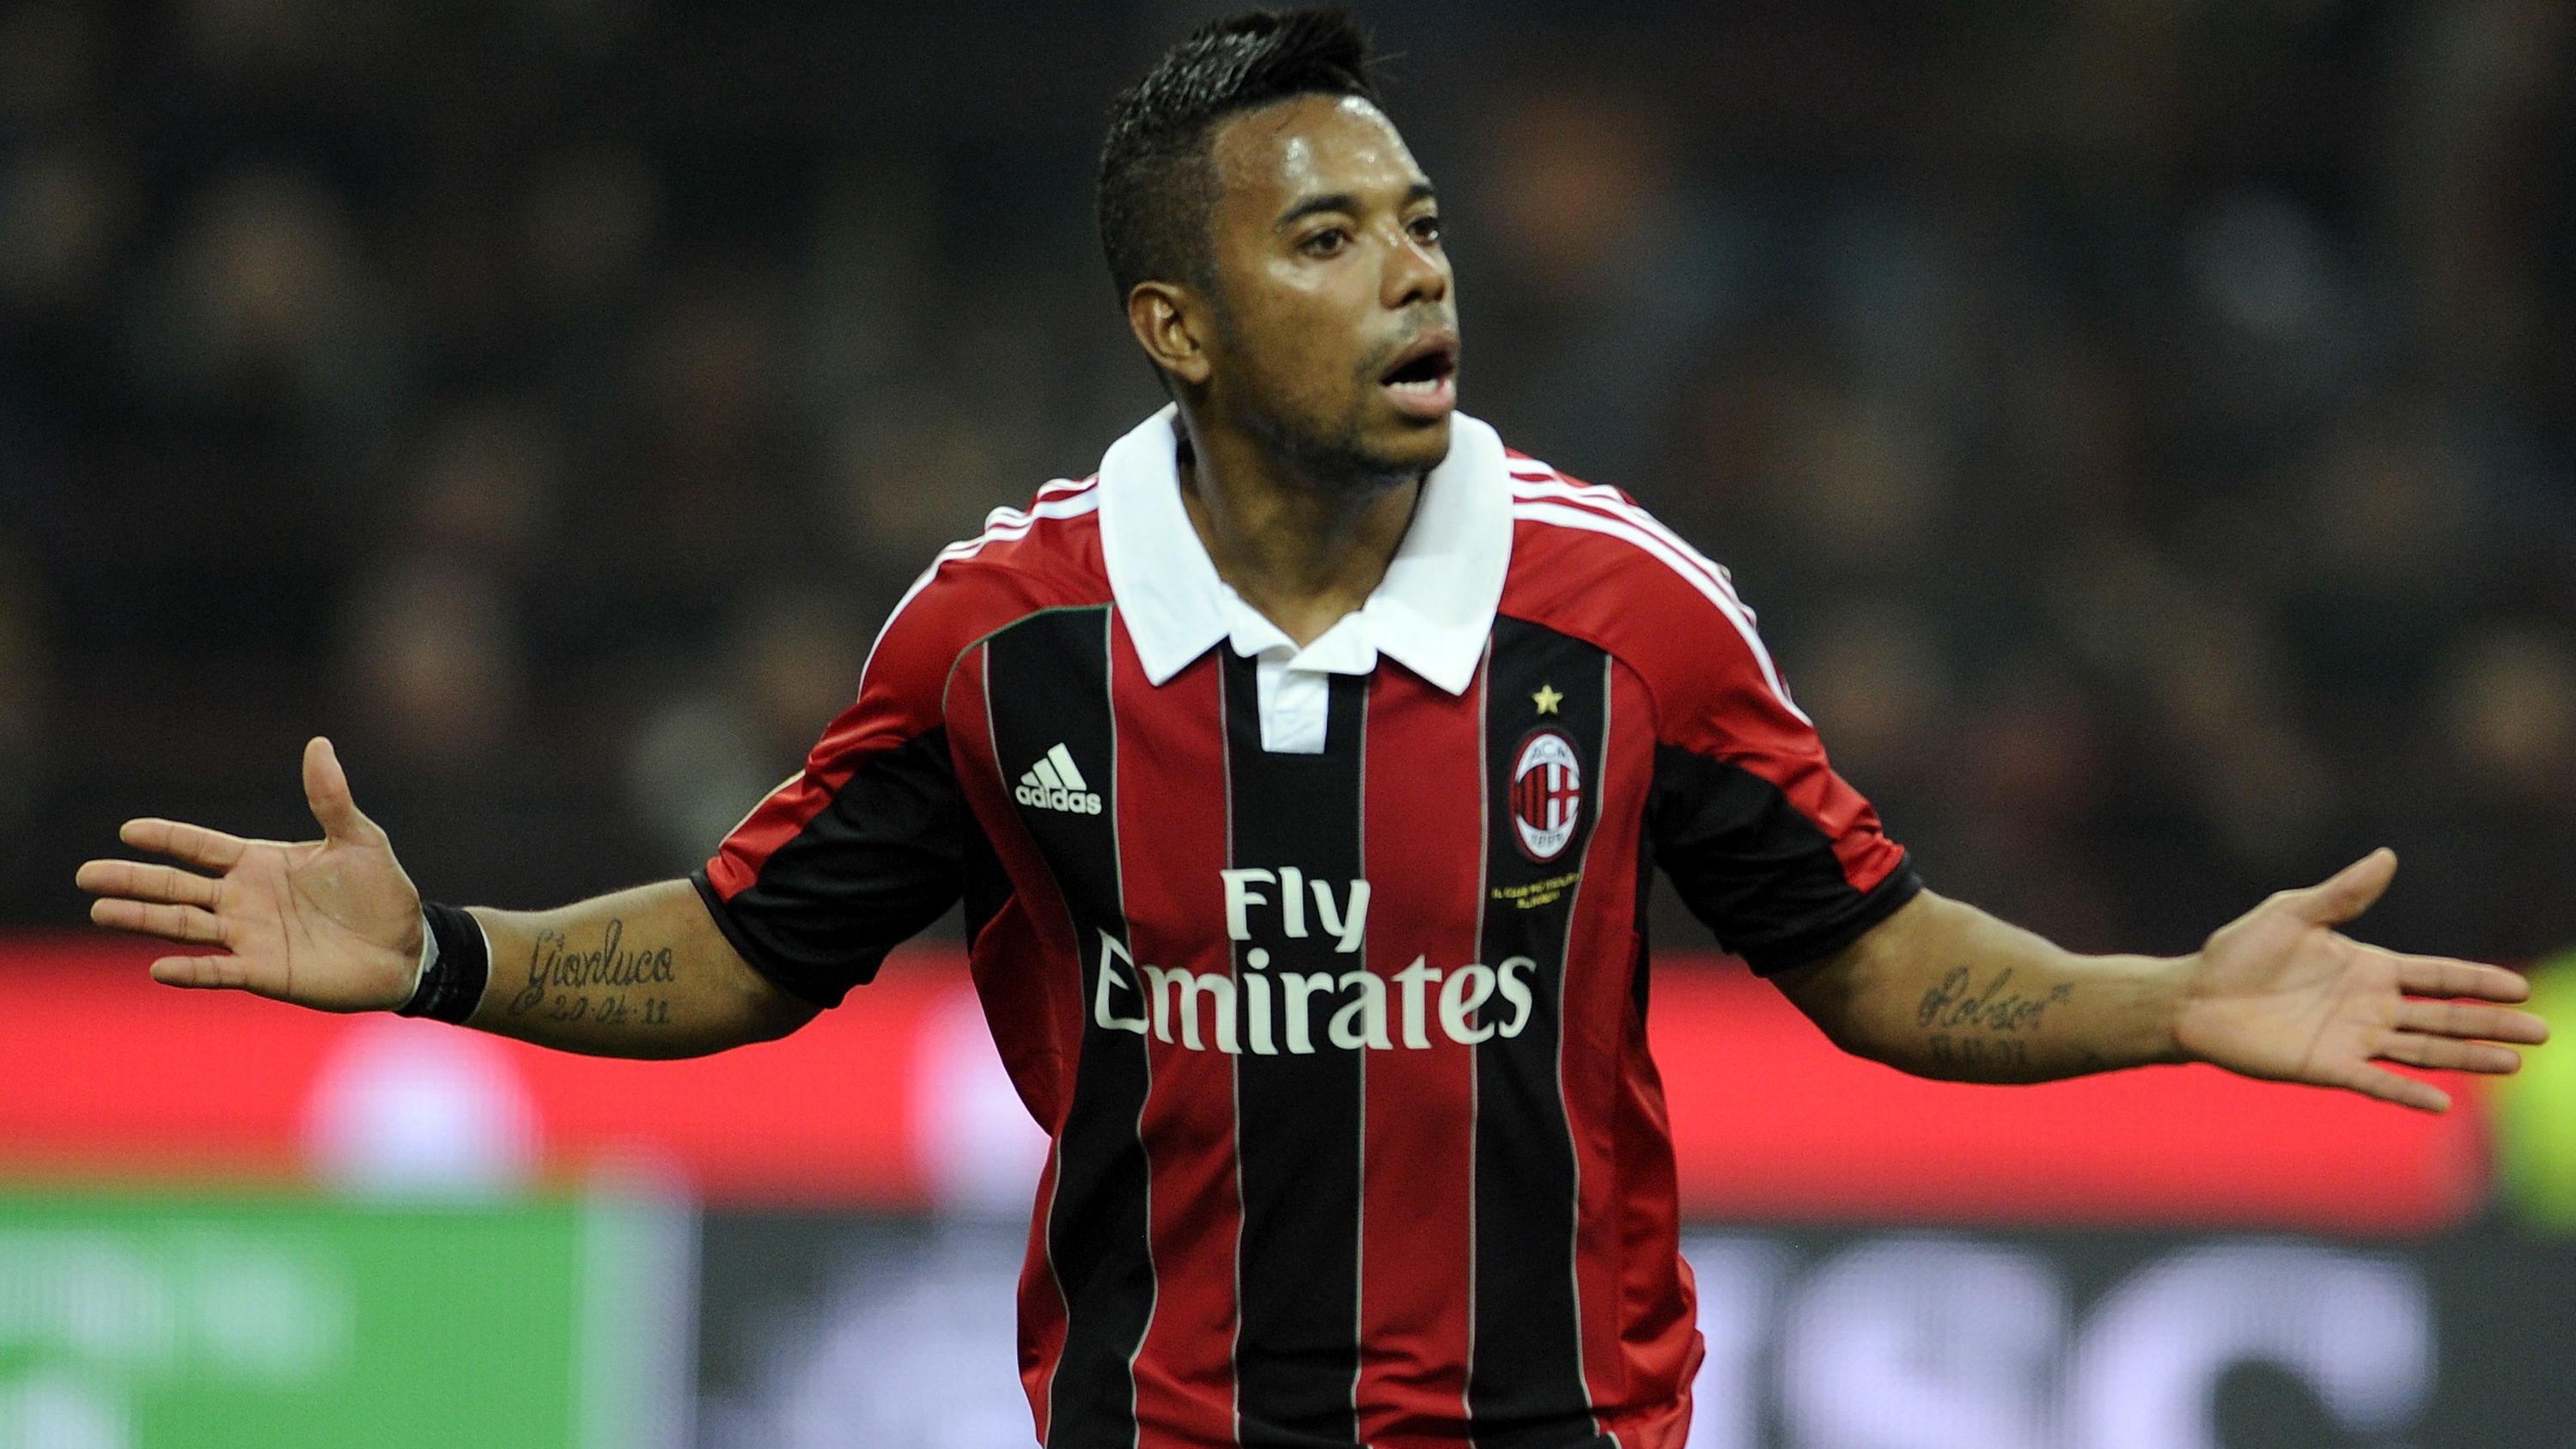 Robinho scored the only goal of the game as AC Milan claimed a 1-0 win over Juventus.